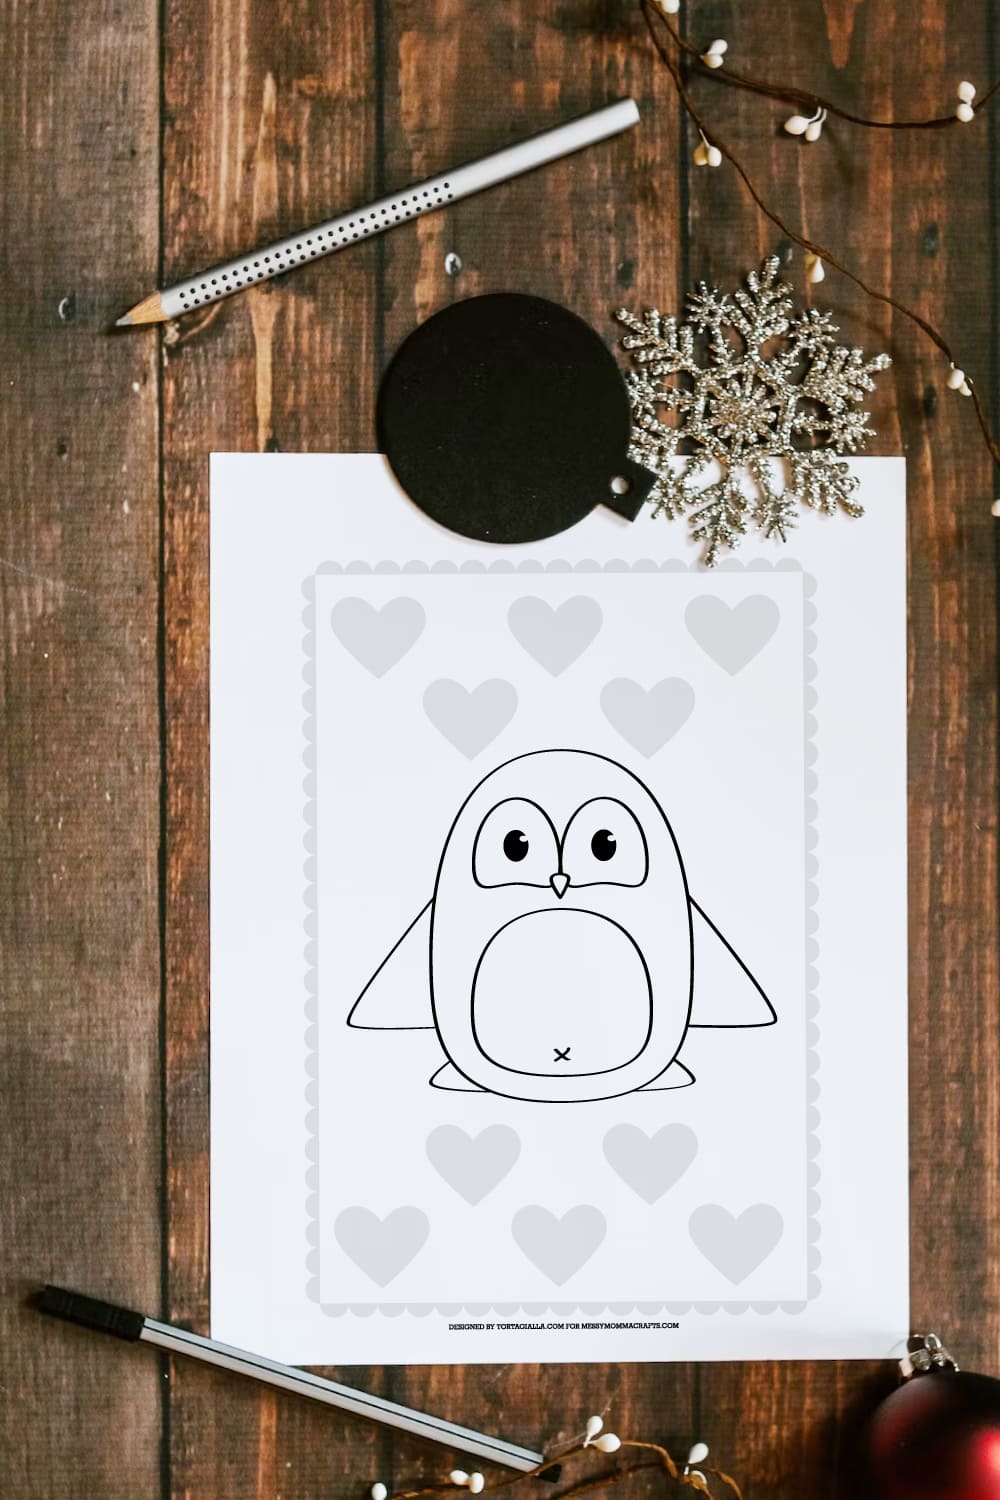 Preview of a penguin coloring page on wooden plank table with pencil, marker and various winter decor on top and bottom.